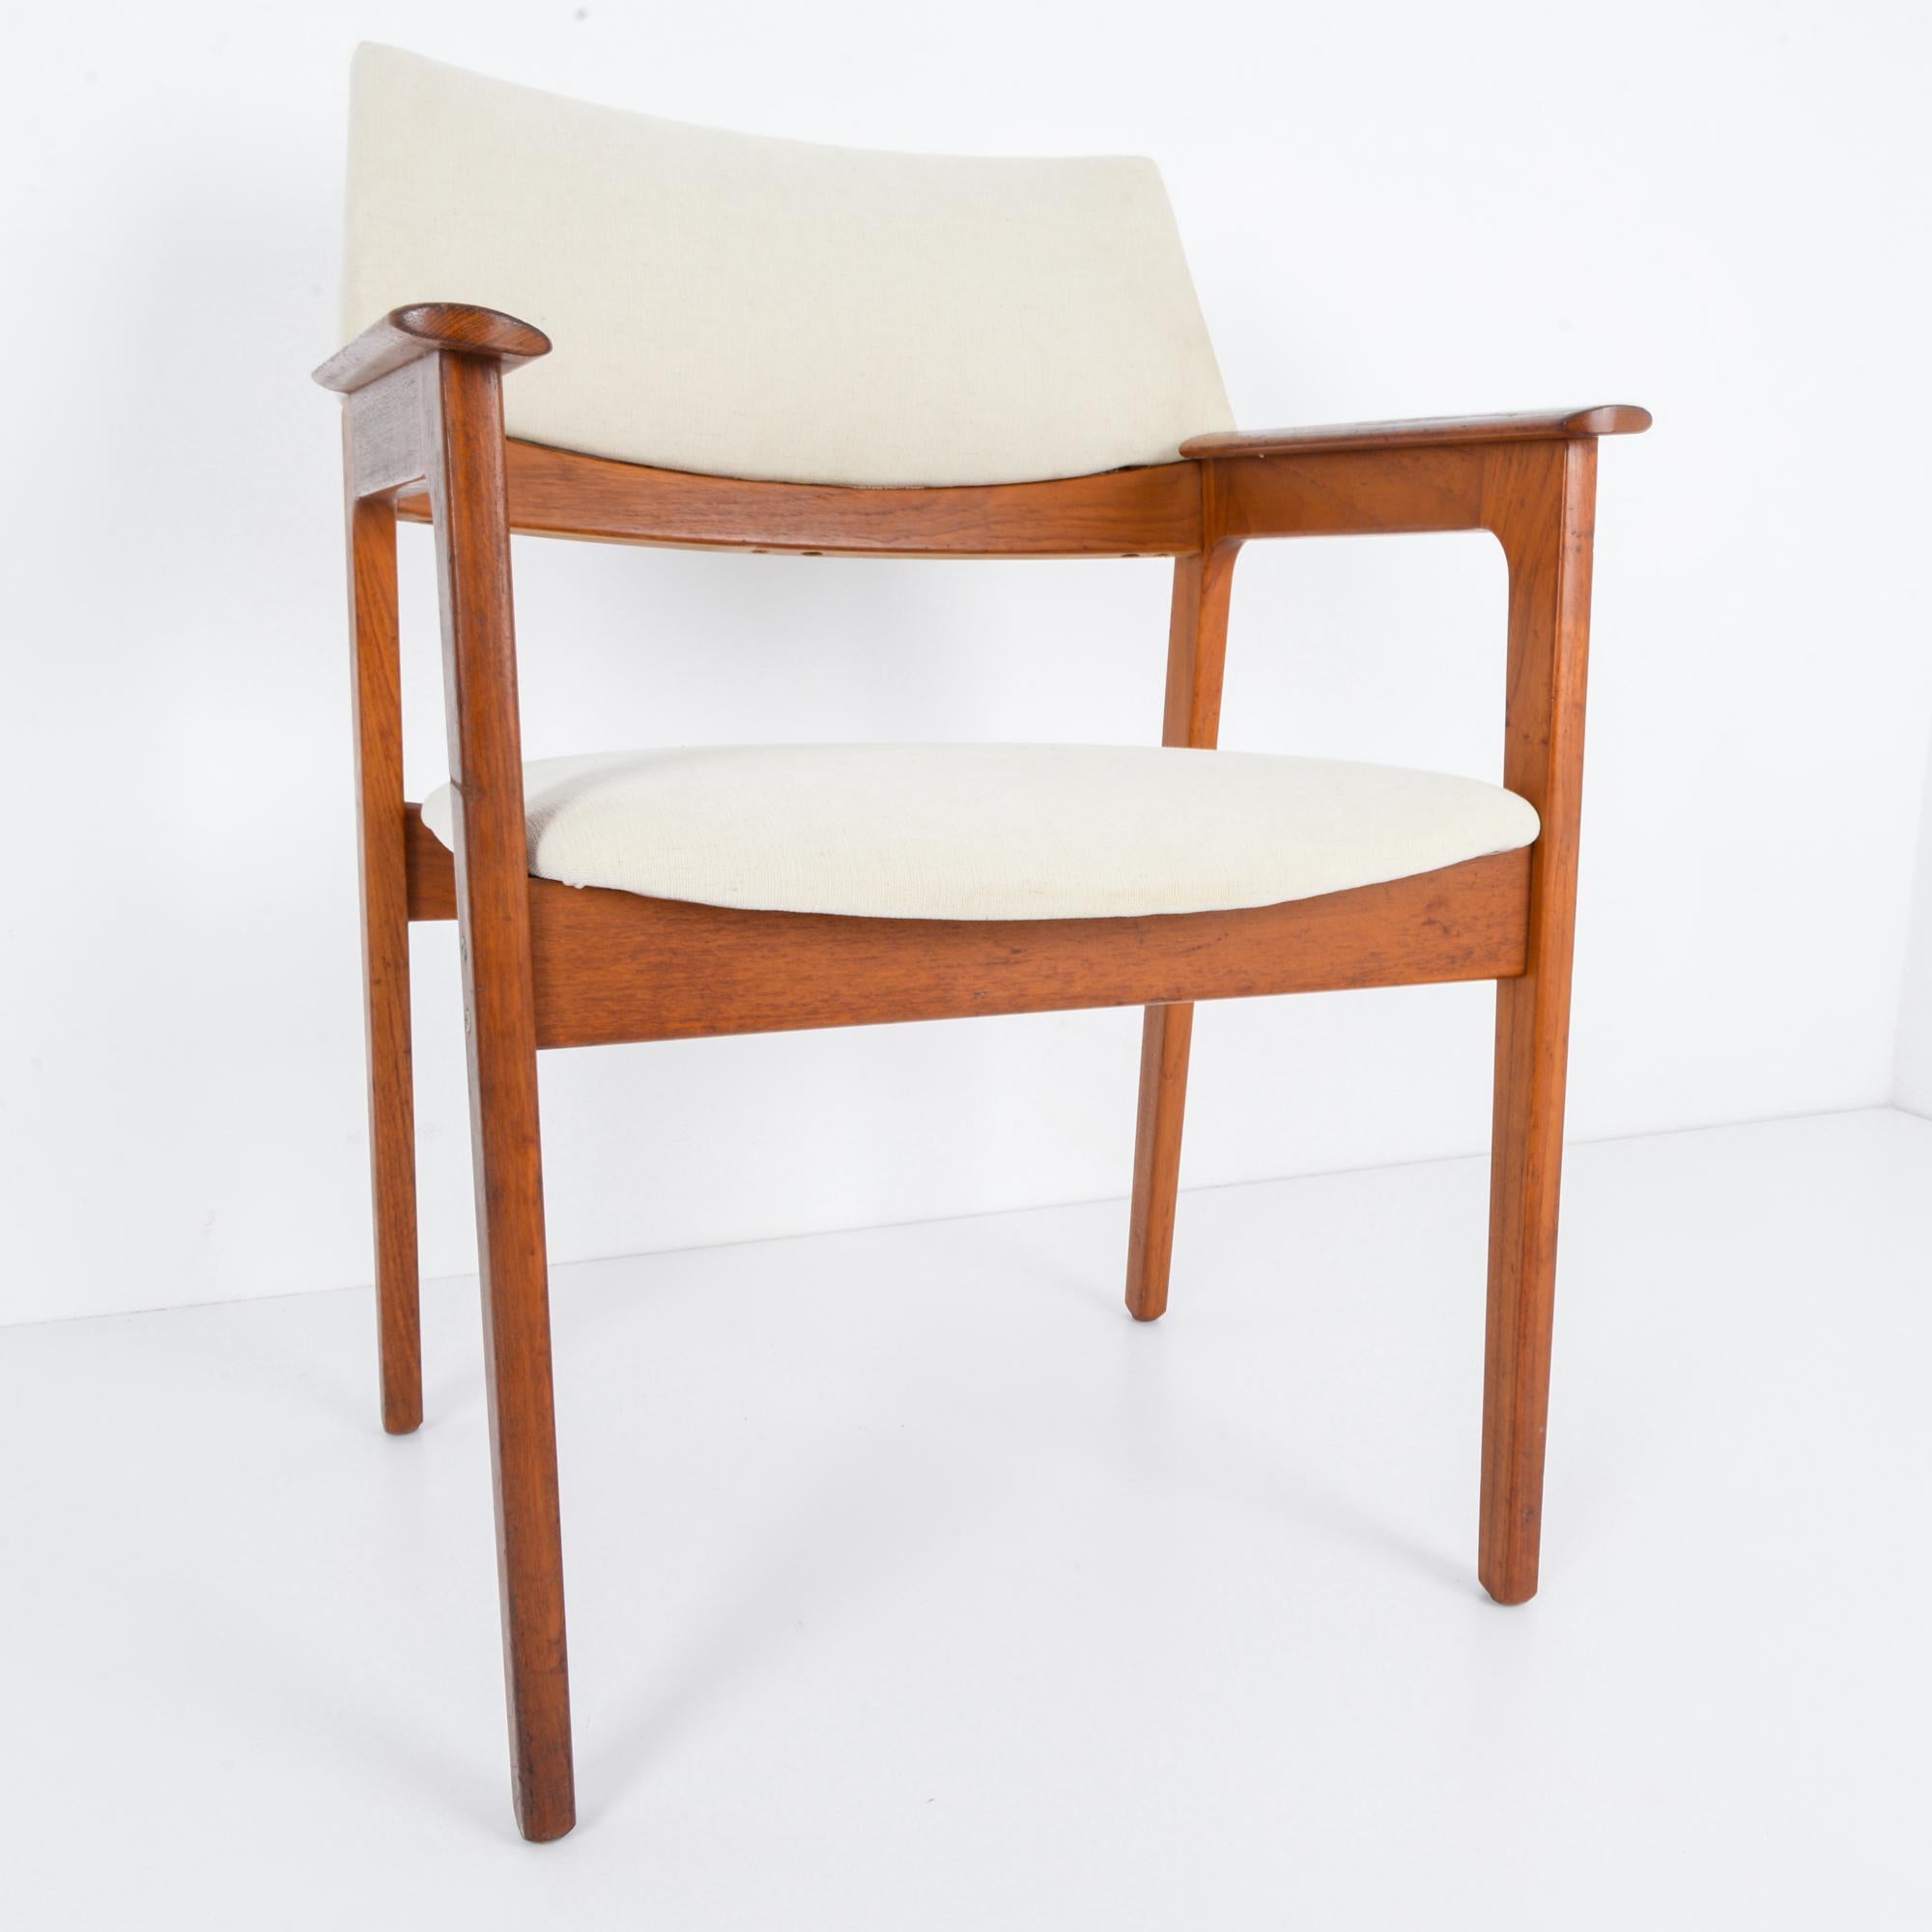 1960s Danish Wooden Armchair with Upholstered Seat and Back For Sale 3